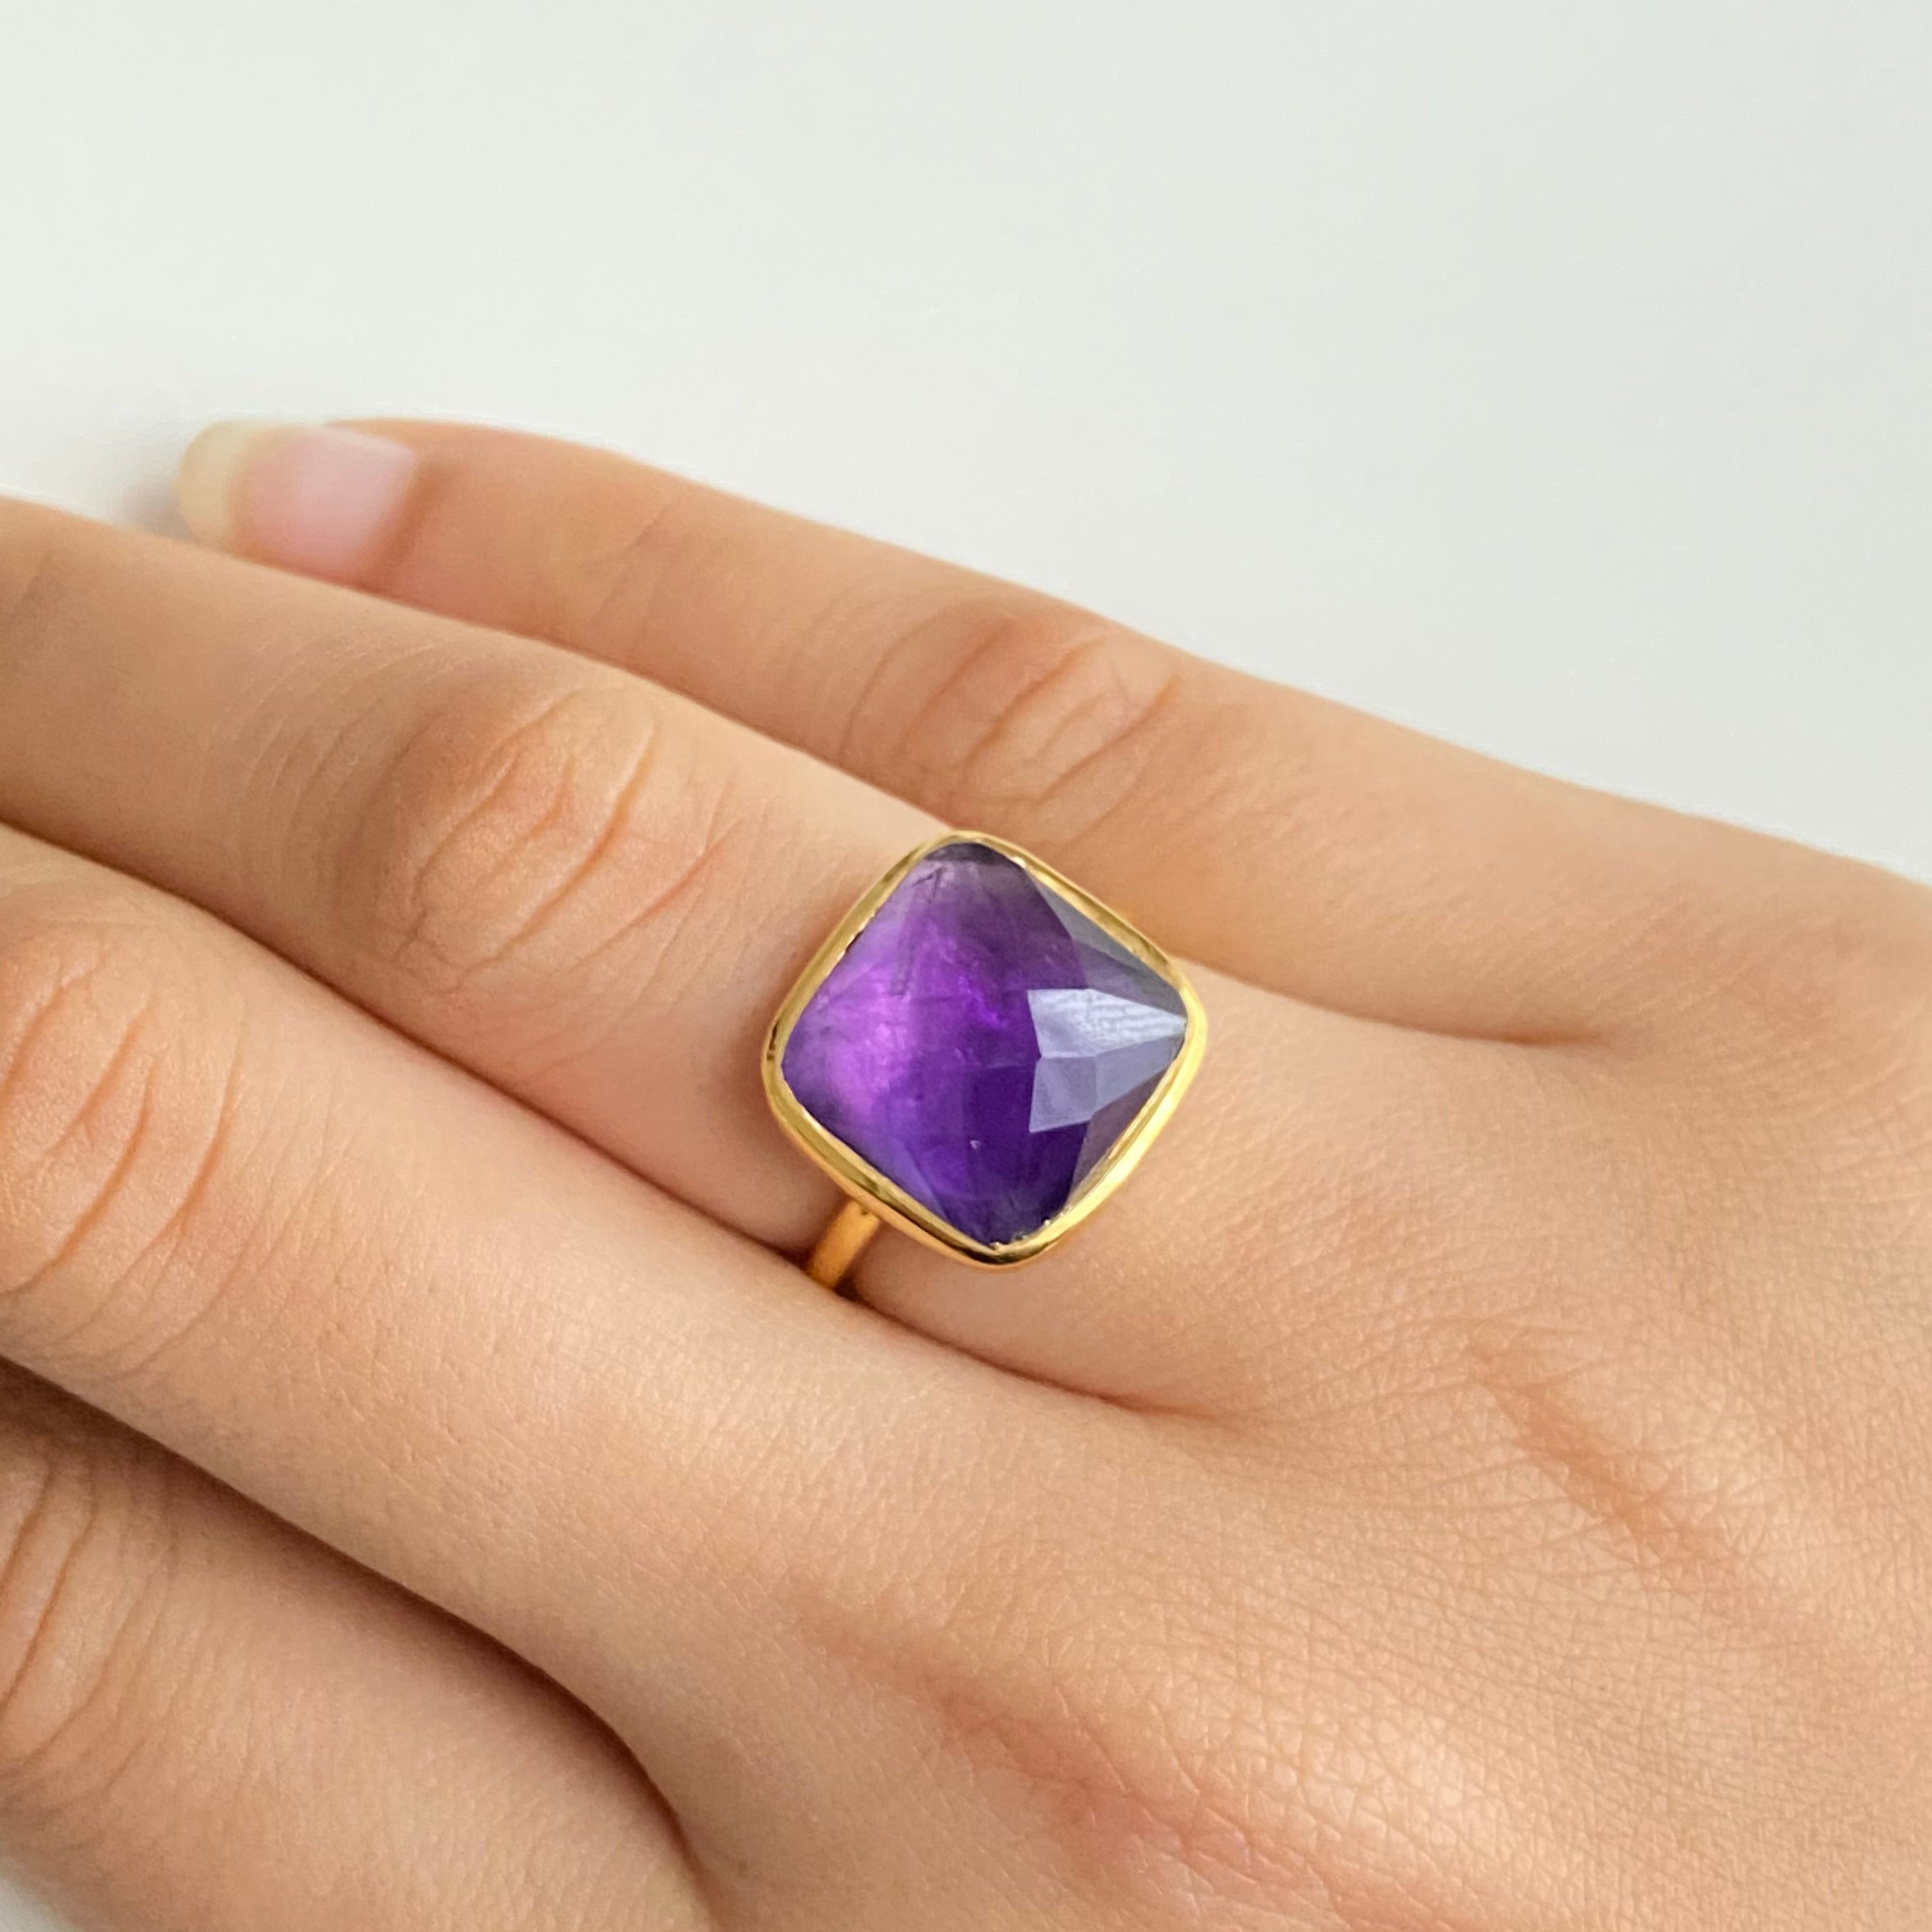 Gold Plated Silver Ring with Square Amethyst Stone 